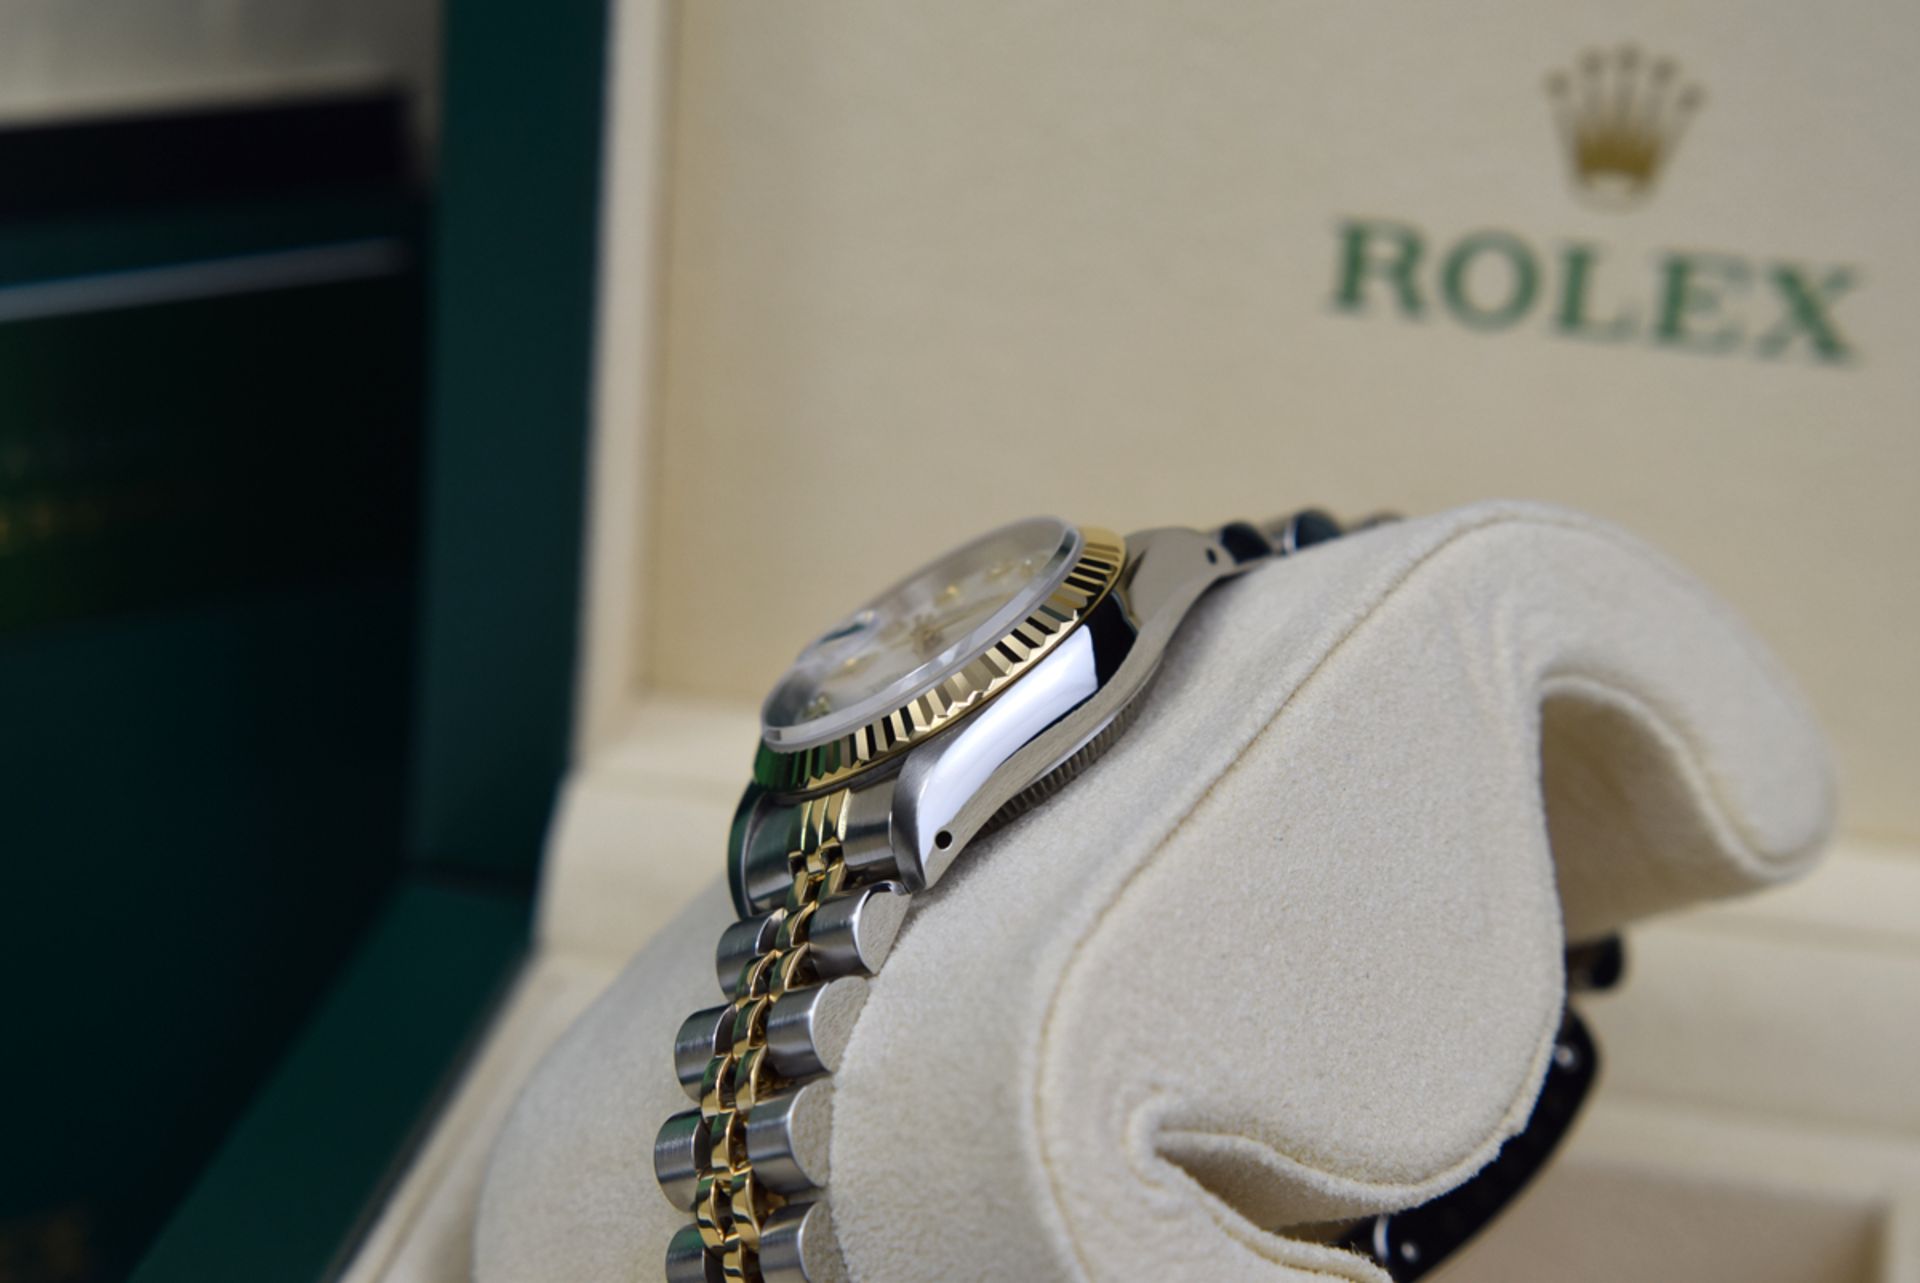 ROLEX *DIAMOND* LADY DATEJUST - 18K GOLD & STEEL WITH WHITE MOP DIAMOND DIAL - Image 14 of 16